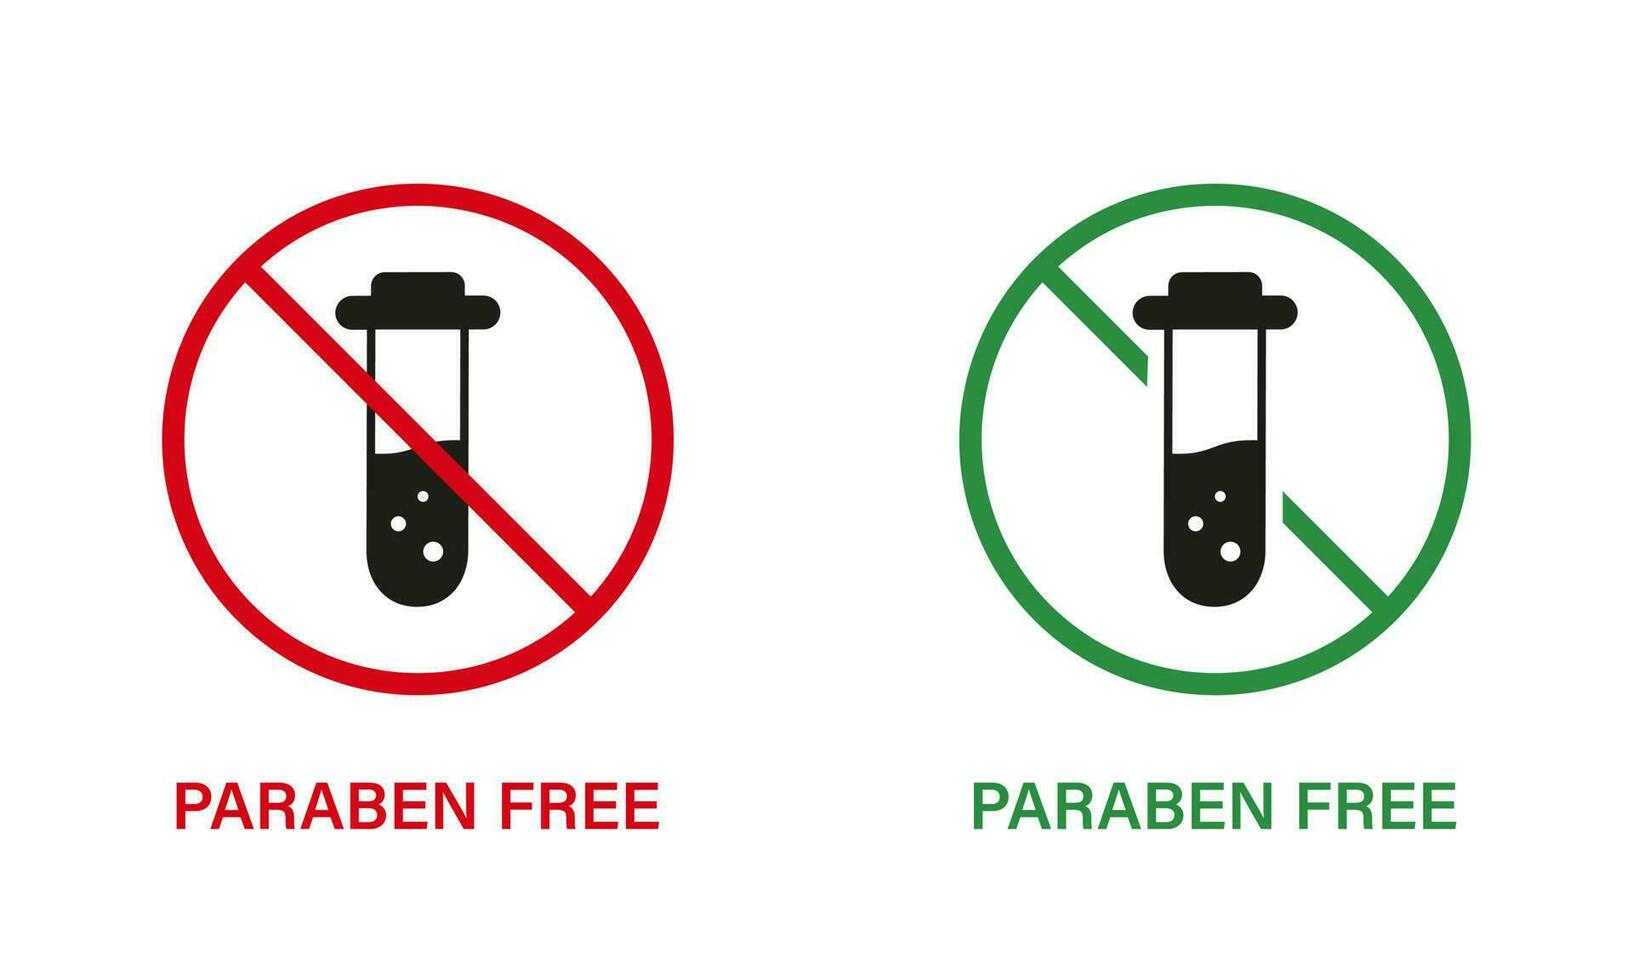 Paraben Free with Test Tube Silhouette Icon Set. Forbidden Paraben in Food Symbol. Safety Eco Organic Cosmetic Bio Product. Chemical Preservative Stop Sign. No Plastic. Vector Illustration.